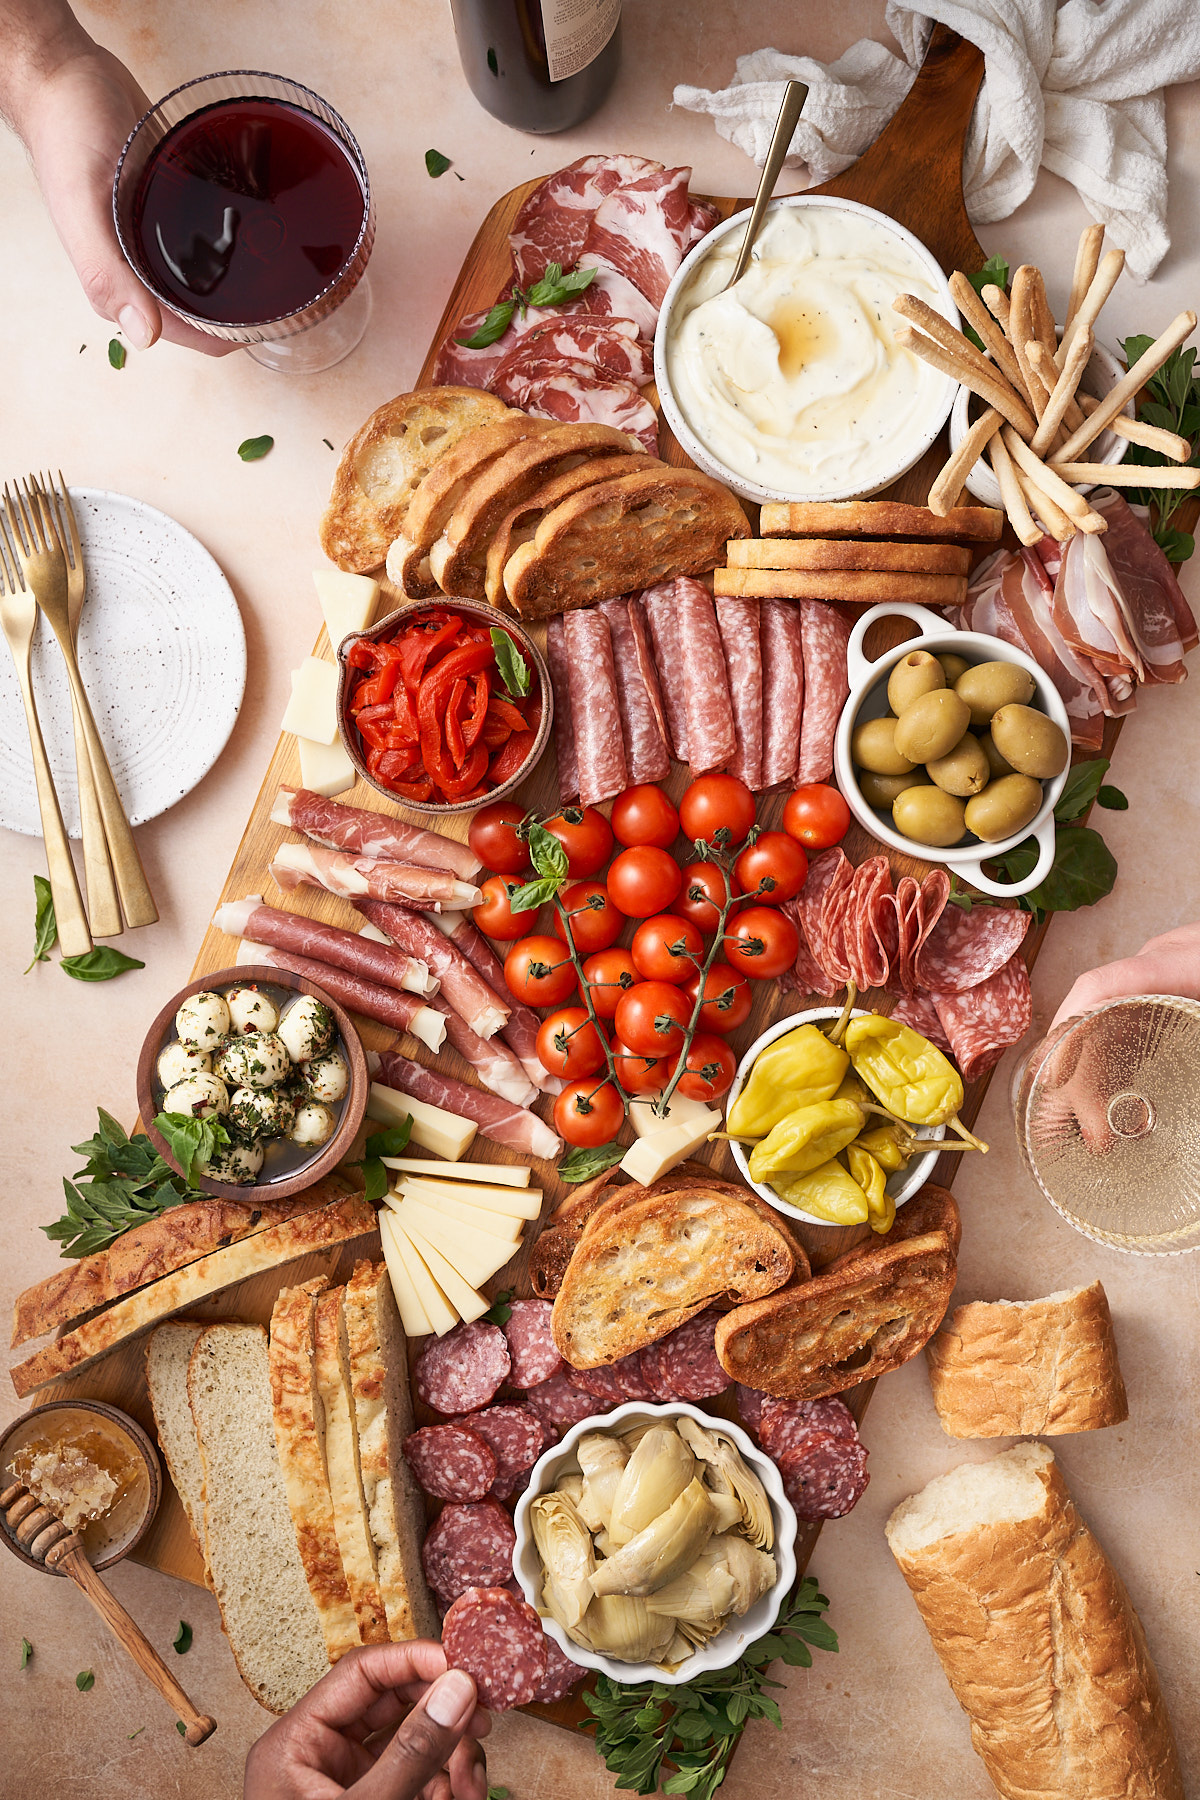 large antipasto platter with bread, cherry tomatoes, marinated vegetables, cheese, and hands reaching for wine and snacks on the board.